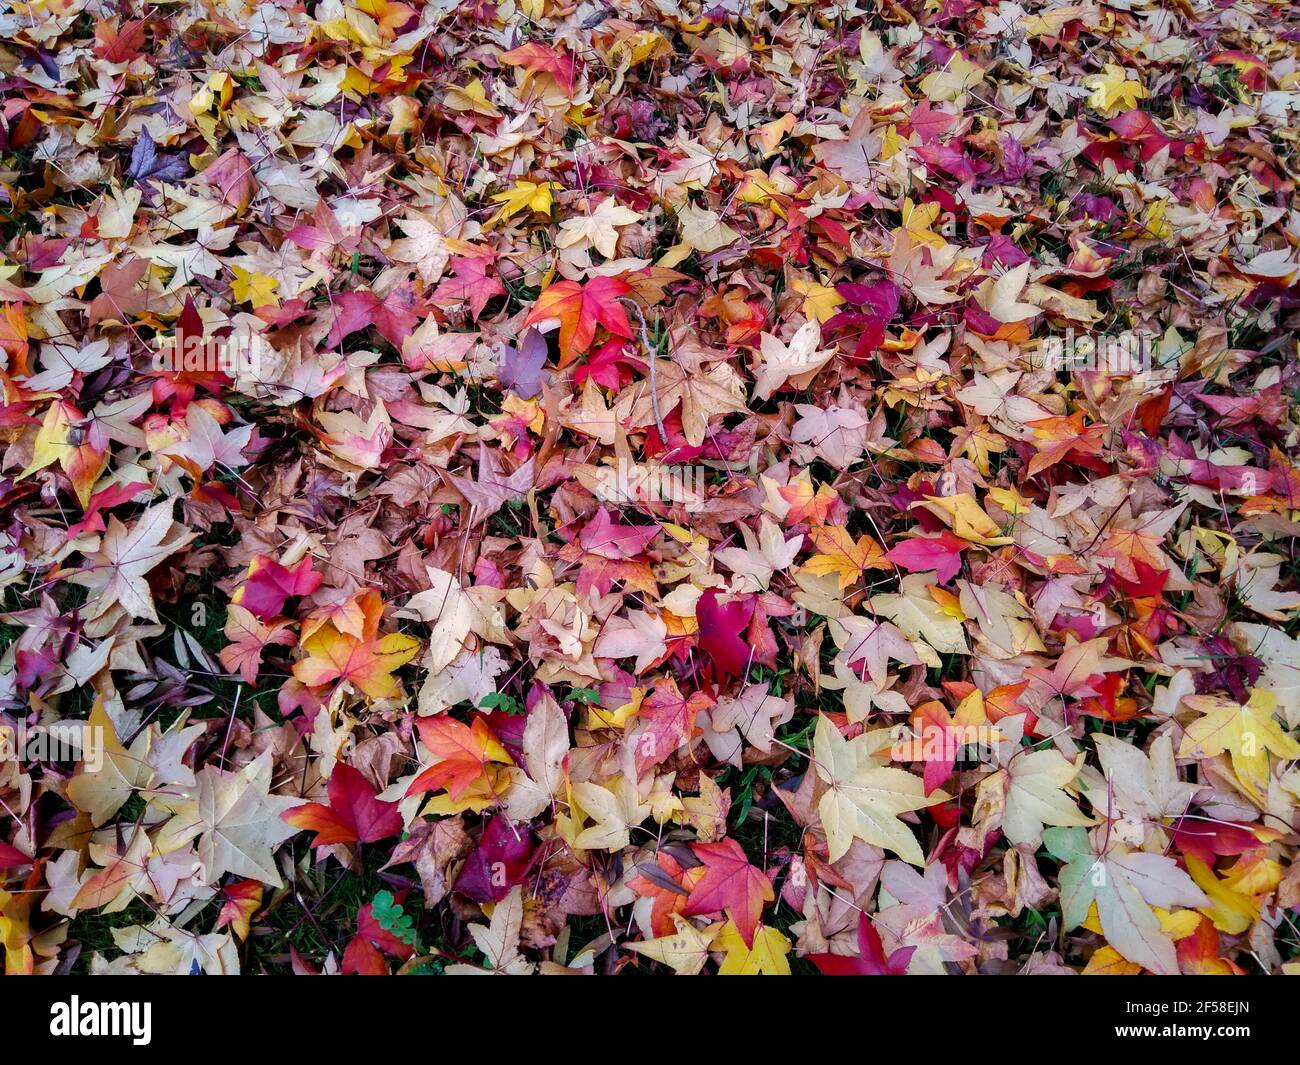 Autumn leaves of a maple tree. Stock Photo